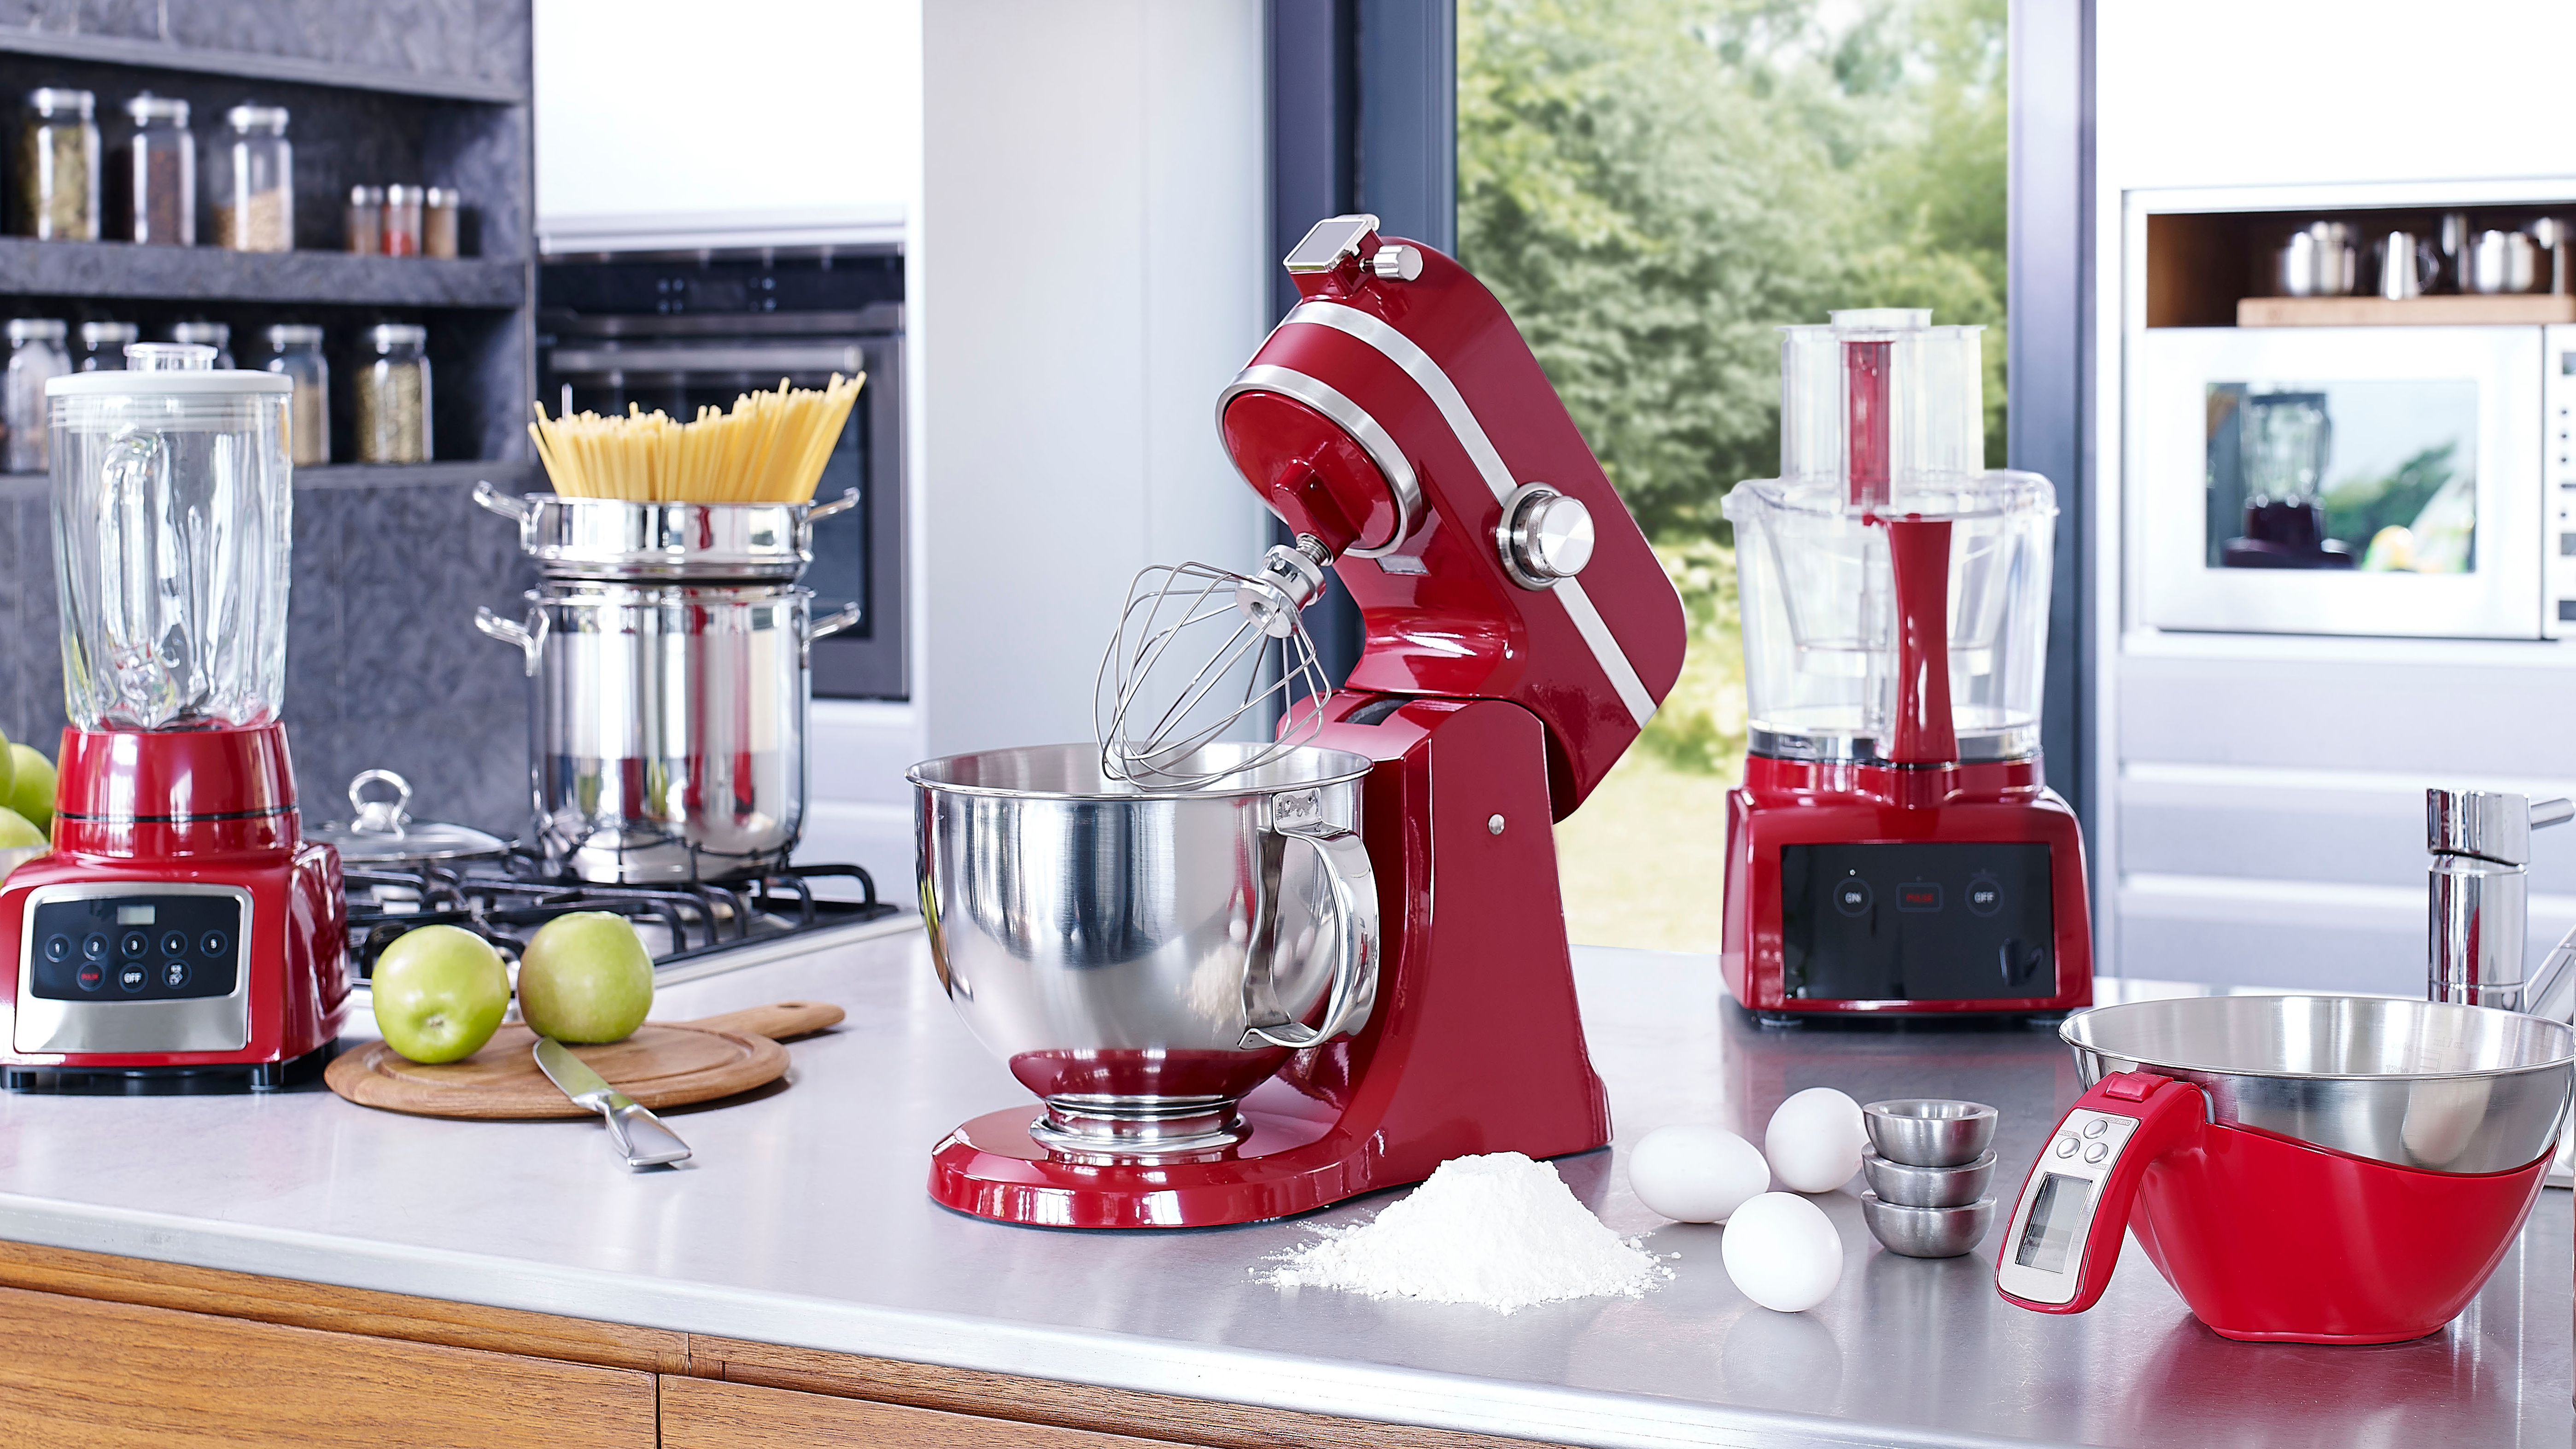 10 handy kitchen gadgets that make holiday cooking and baking easier